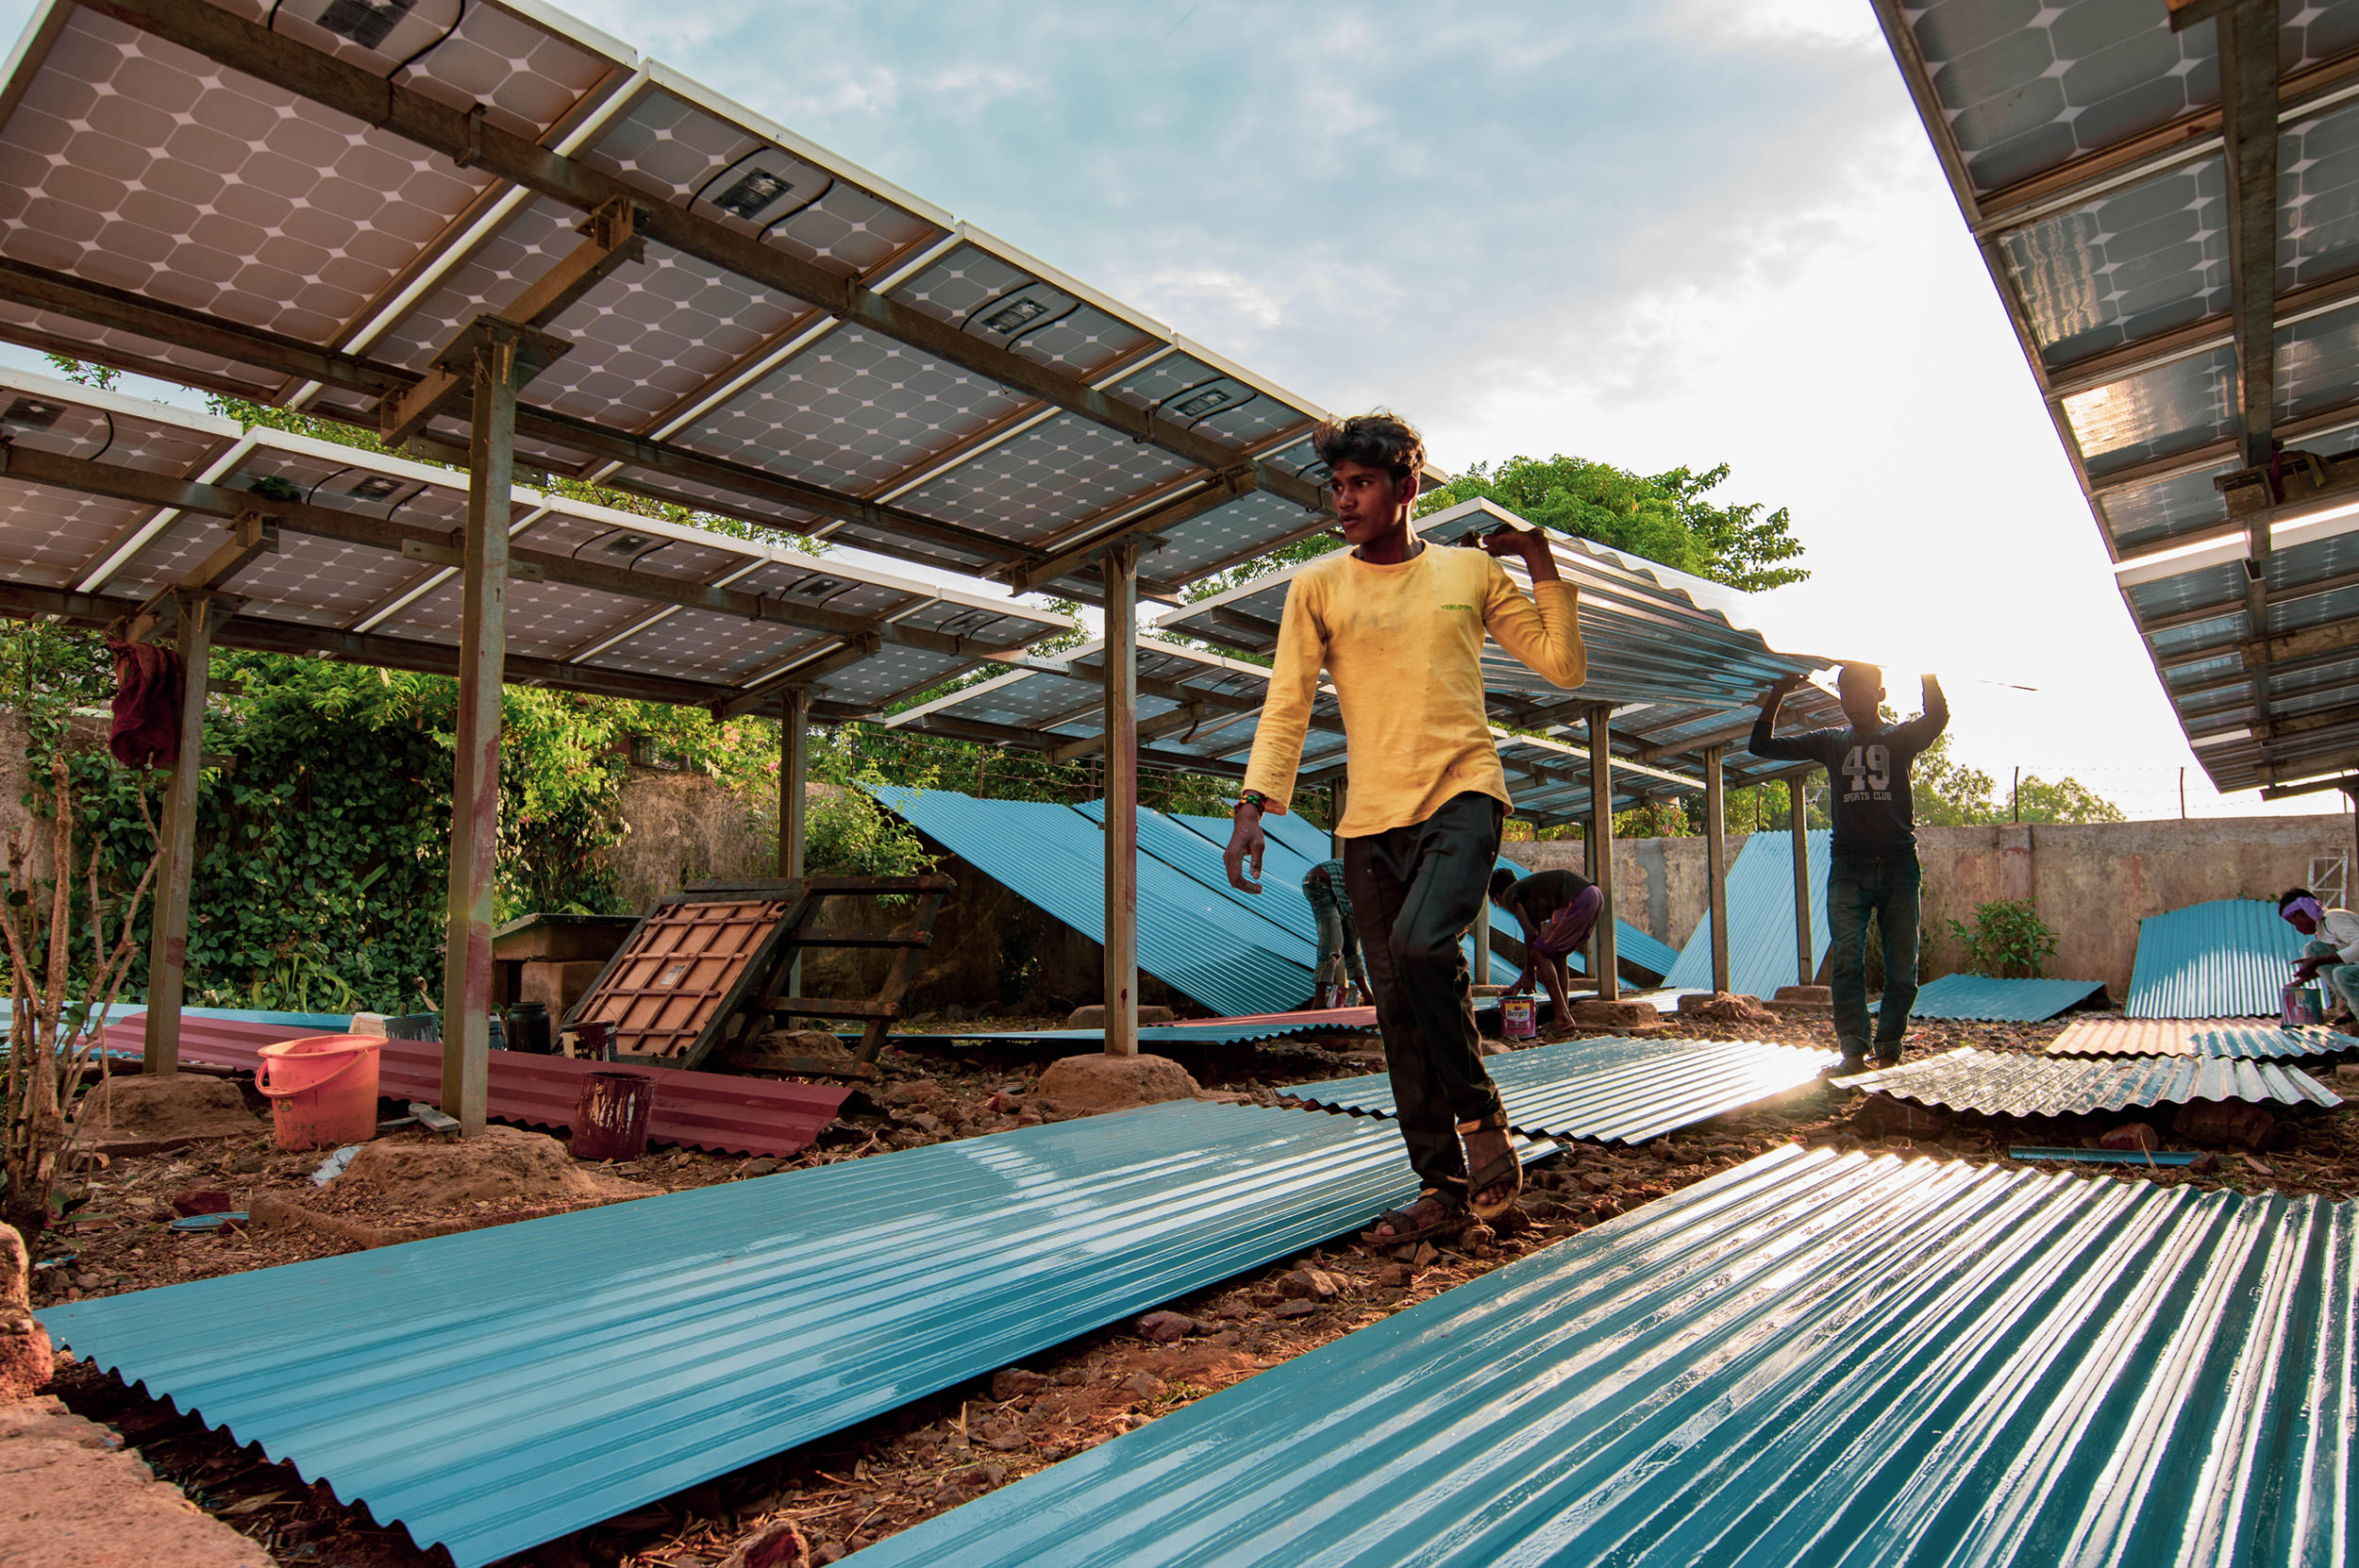 Mohan Majhi (L), age 18, and Hiran Naik (R), age 23, carry a finished roofing sheet to be placed on the roof. Photo credit: Ajaya Behera.